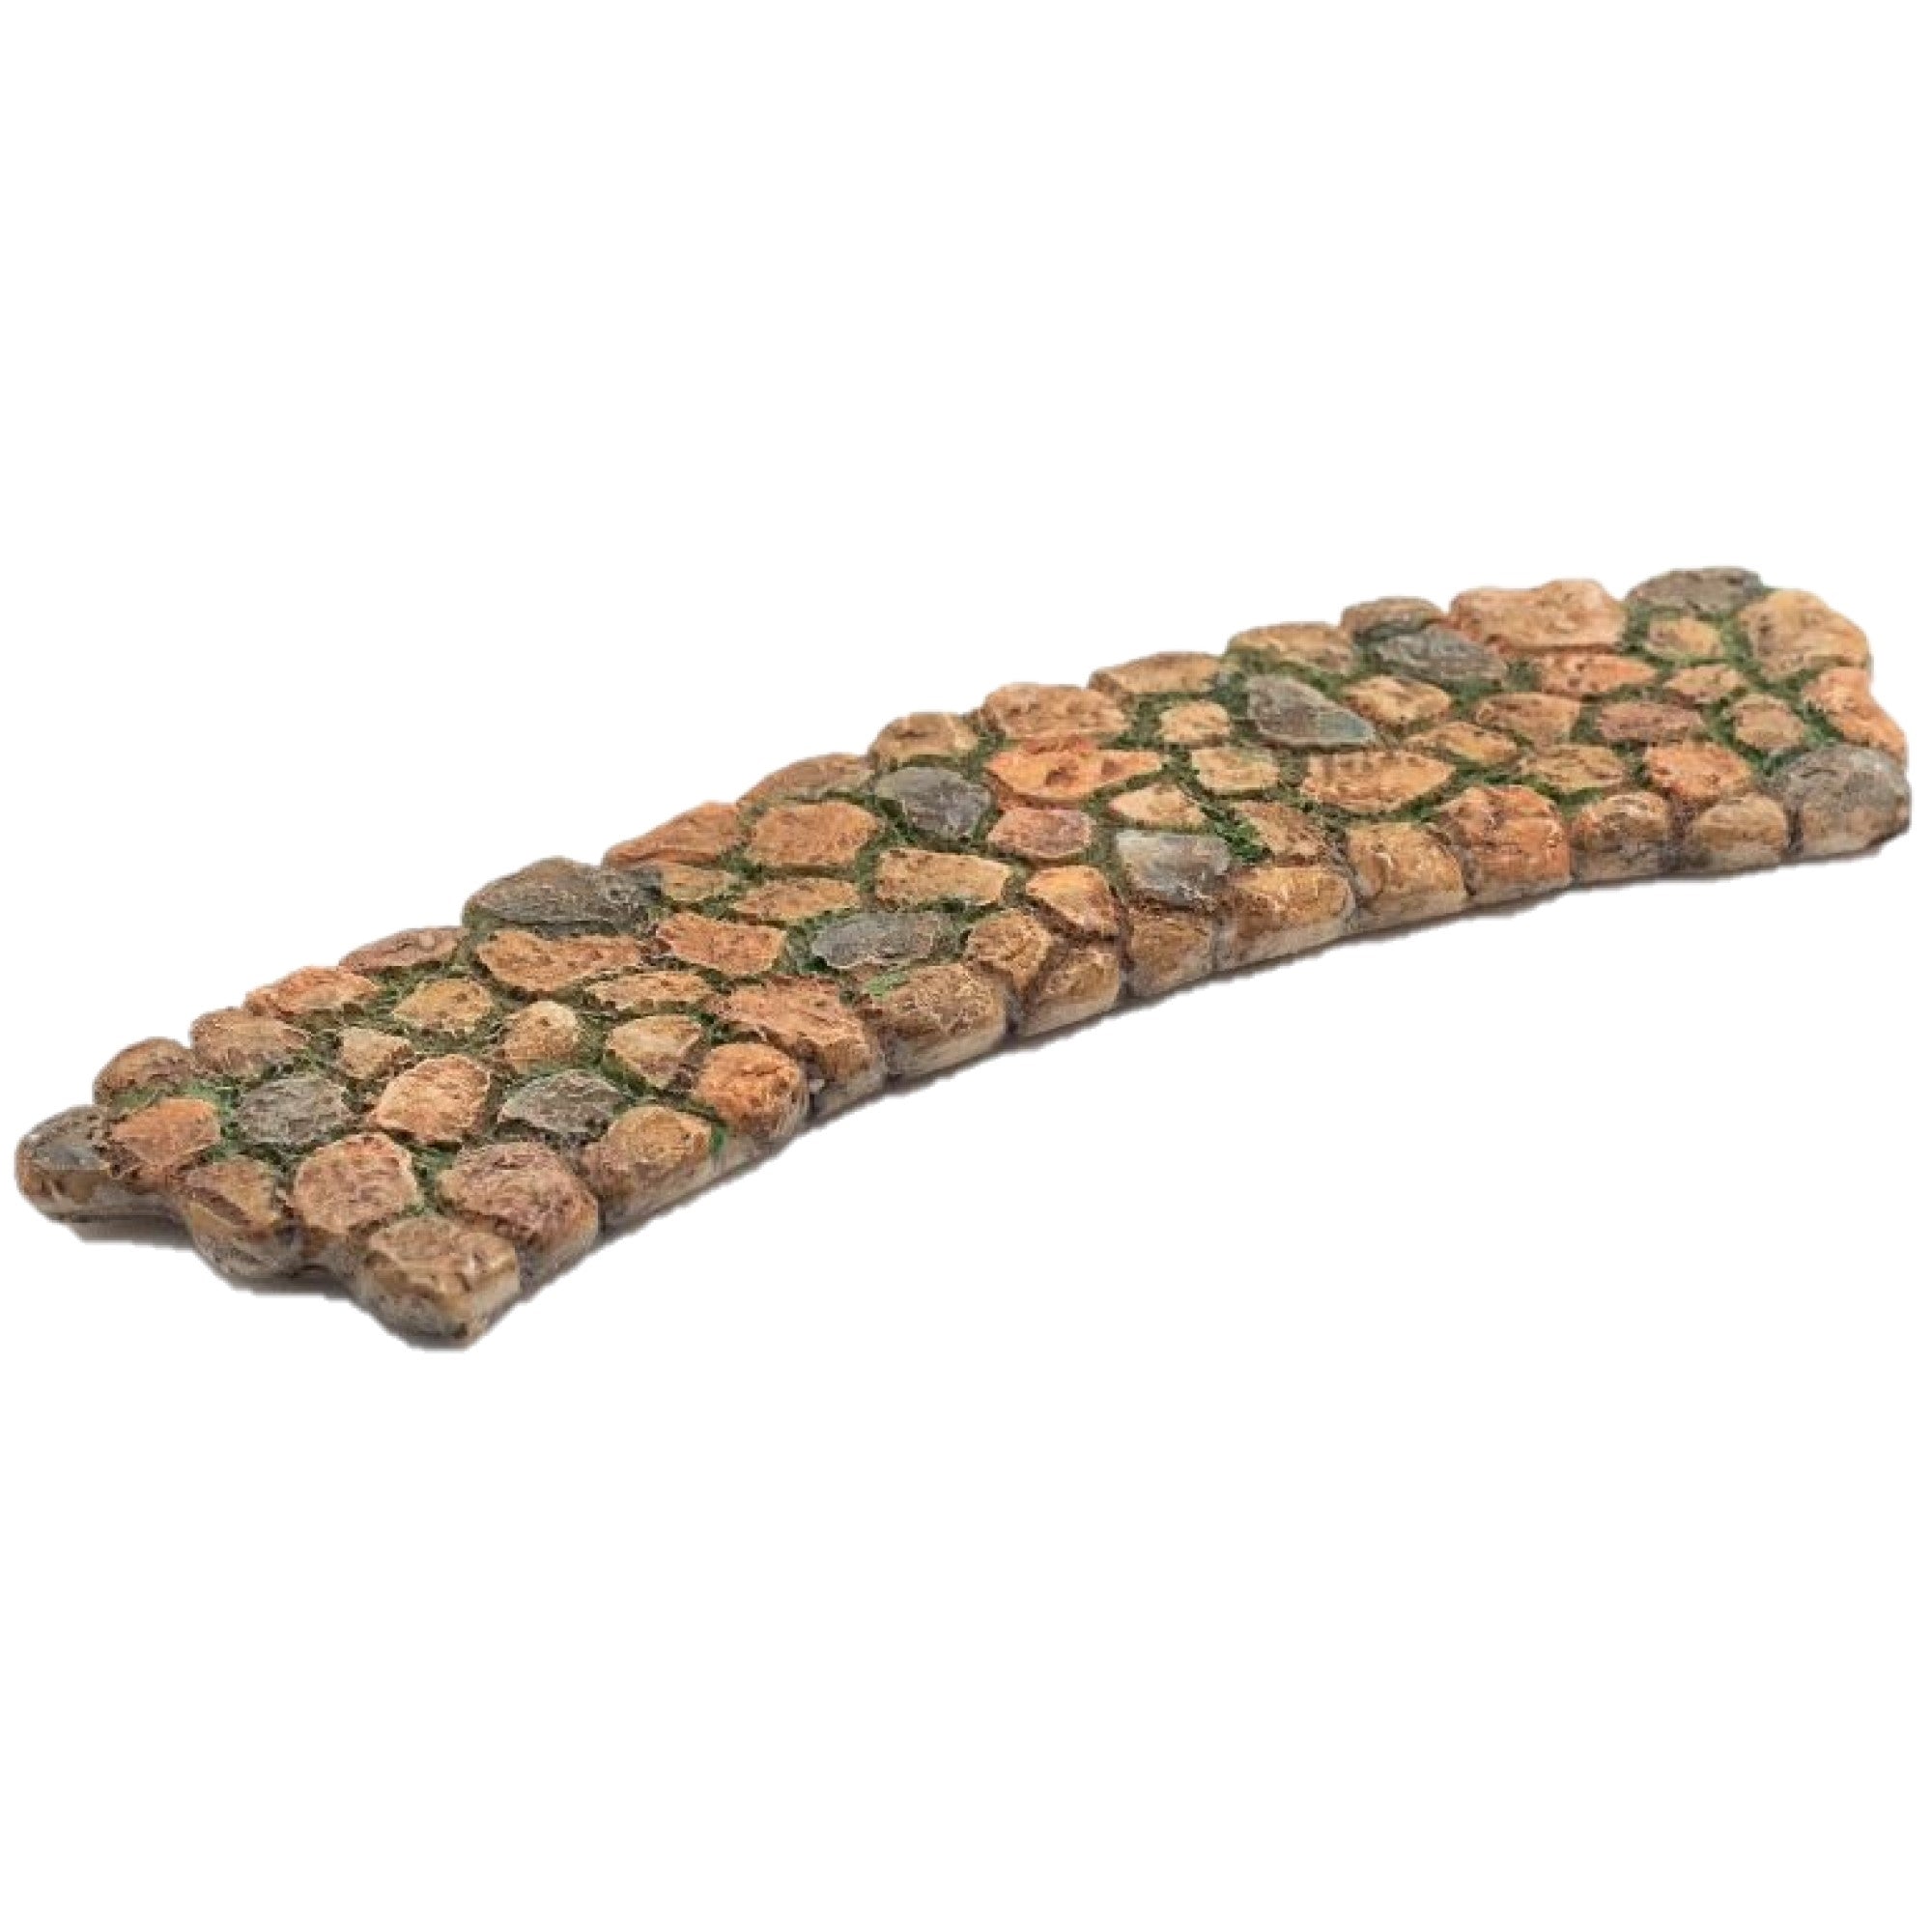 Marshall Home & Garden Fairy Garden Woodland Knoll Collection, Curved Road